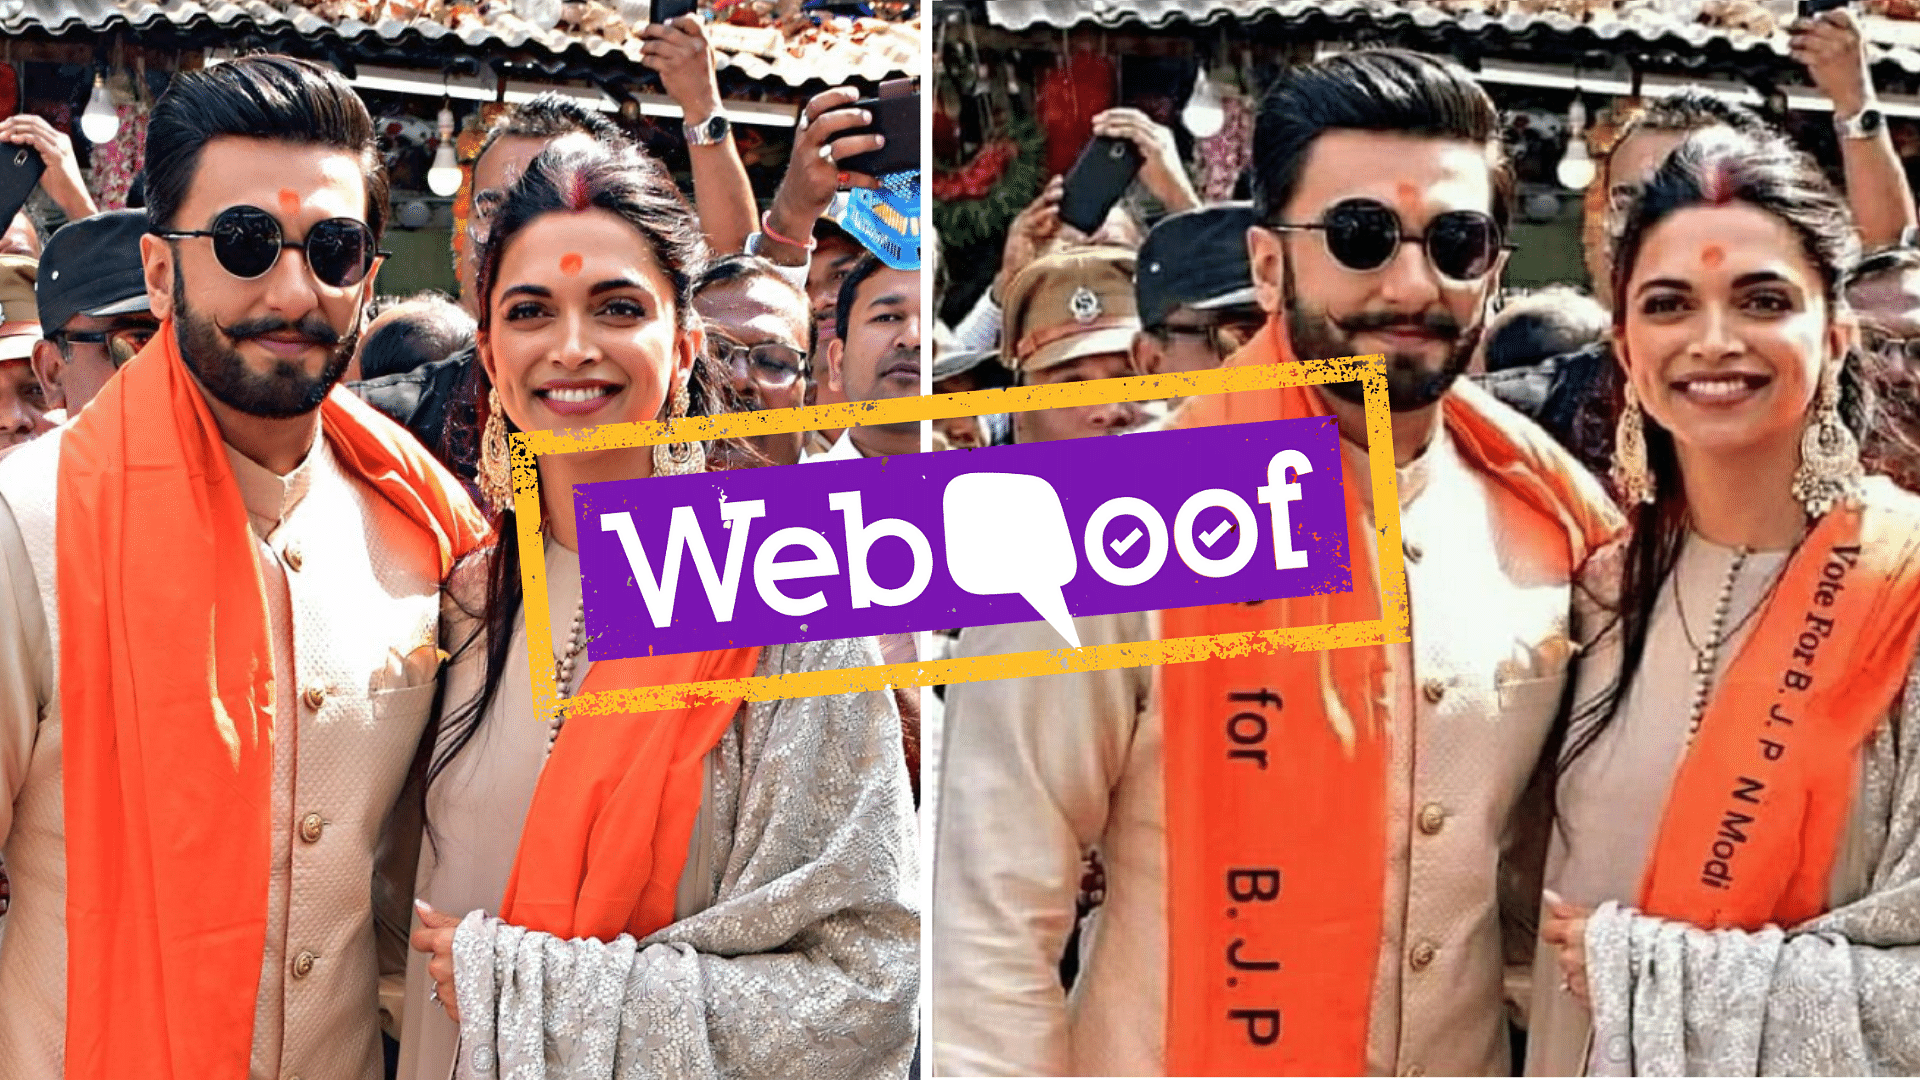 A doctored image of Ranveer Singh and Deepika Padukone campaigning for PM Modi has been doing the rounds. 